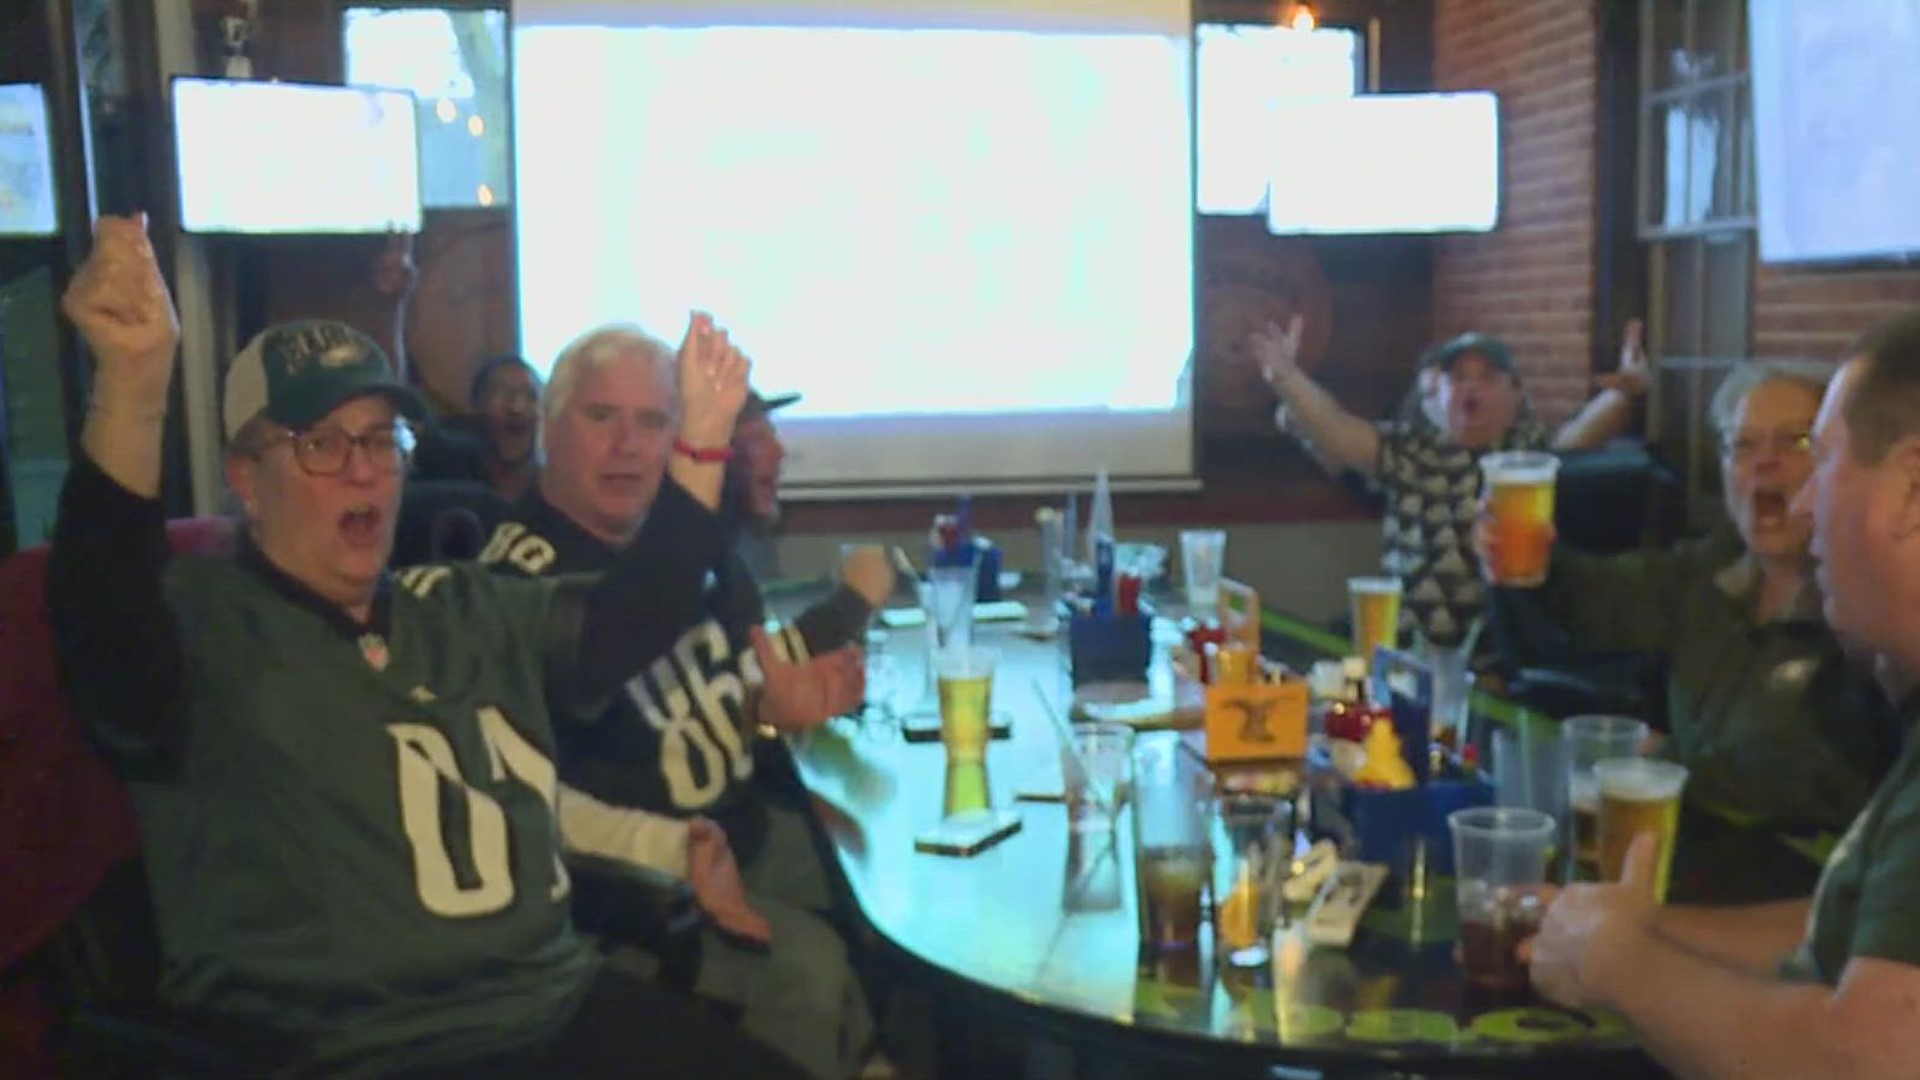 Eagles fans across south central Pennsylvania are flying high after the team punched their ticket to Super Bowl LVII.